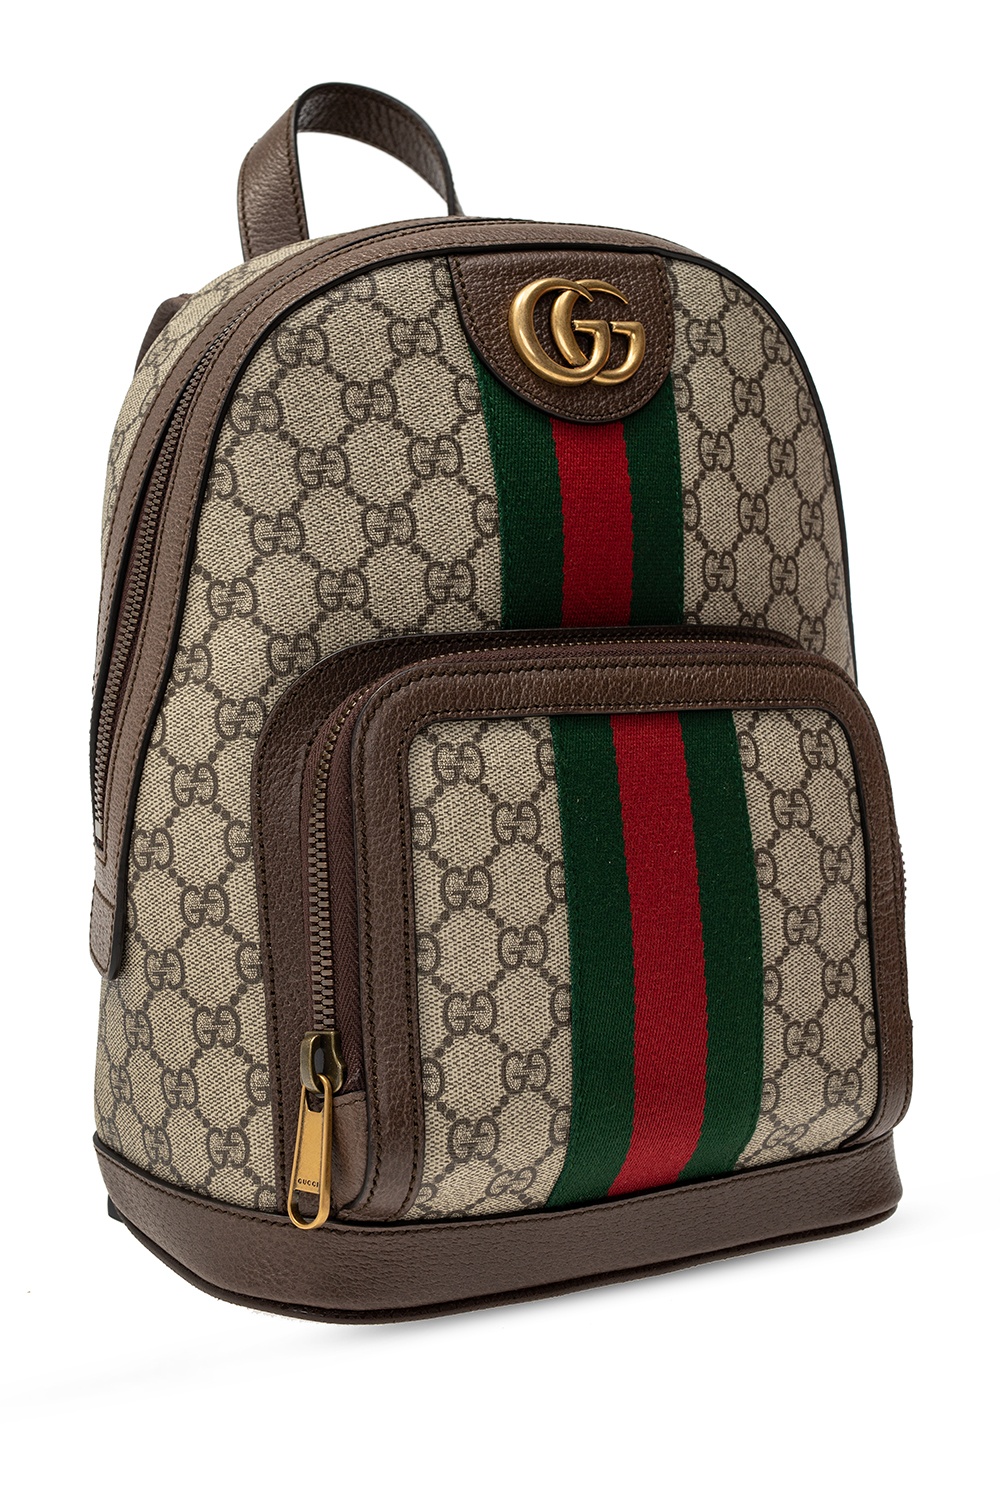 BALO GUCCI OPHIDIA GG SMALL BACKPACK 22